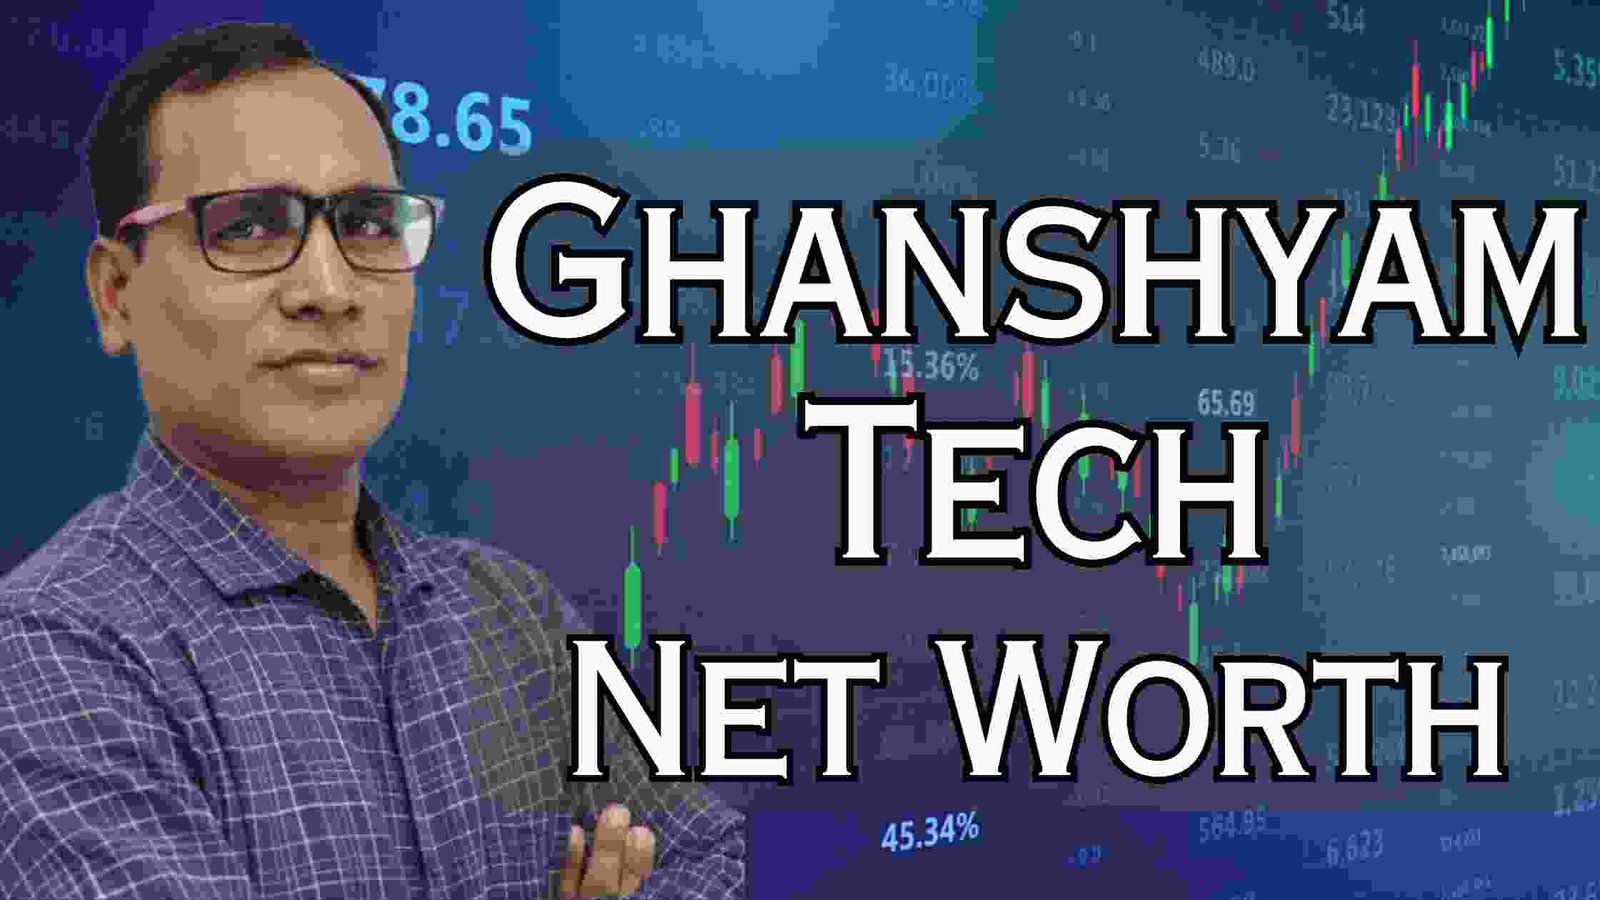 Ghanshyam Tech net worth, age, wife, and life story